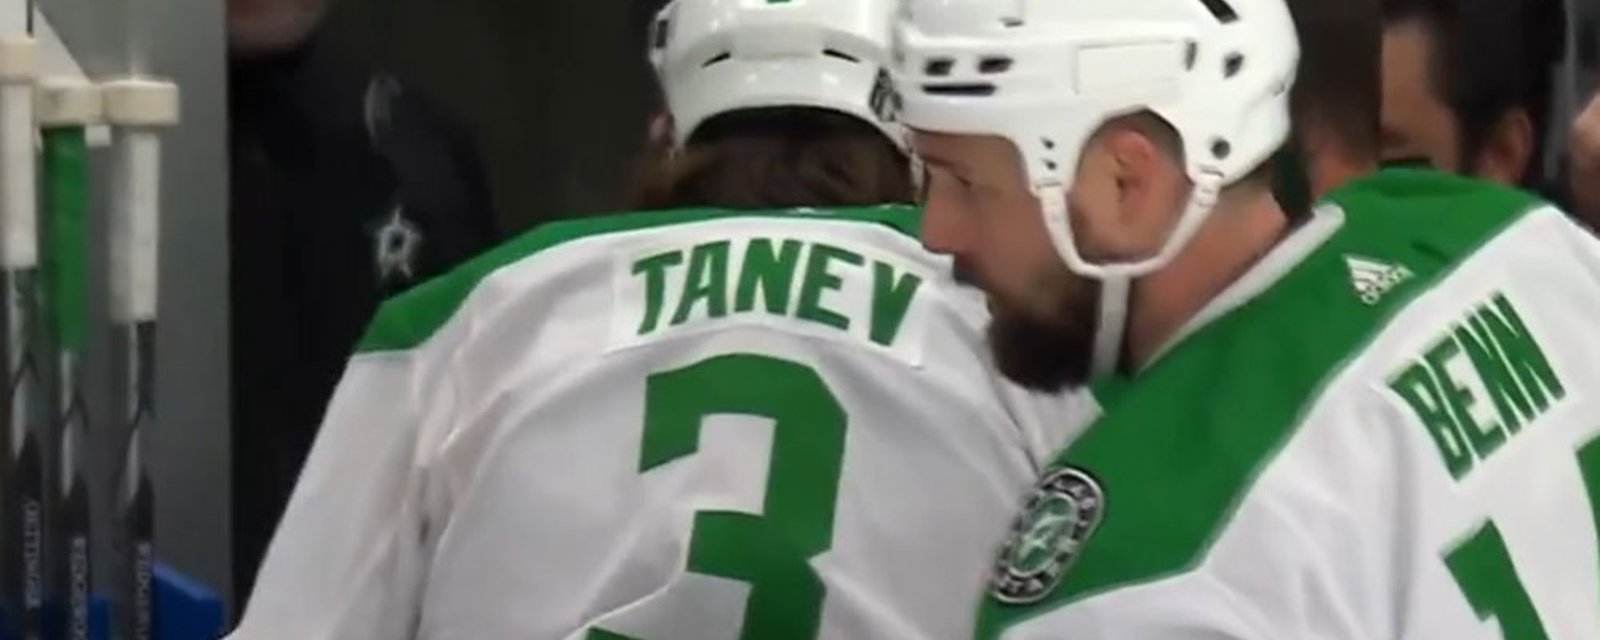 Report: Chris Tanev seen in walking boot cast after Game 4